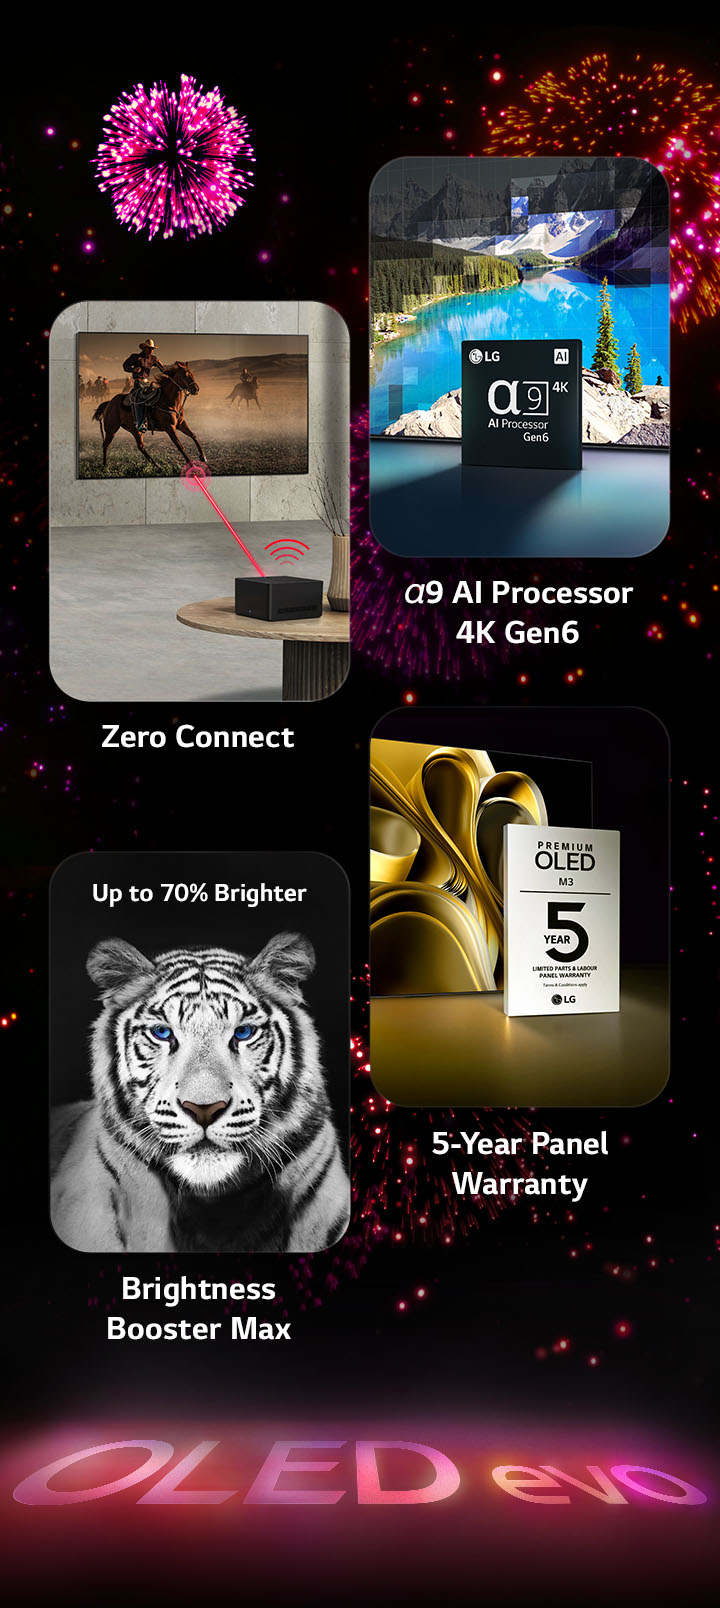 An image presenting the key features of the LG OLED evo M3 against a black background with a pink and purple firework display. The pink reflection from the firework display on the ground shows the words "OLED evo." Within the picture, an image depicting Zero Connect shows OLED M3 on the wall of a gray room with the Zero Connect Box wirelessly transmitting the picture. An image depicting the α9 AI Processor 4K Gen6 shows the chip standing before a picture of a lake scene being remastered with the processing technology. An image presenting Brightness Booster Max shows a tiger with deep contrast and bright whites. An image presenting the 5-Year Panel Warranty shows the Premium OLED M3 warranty logo with the display in the backdrop. 